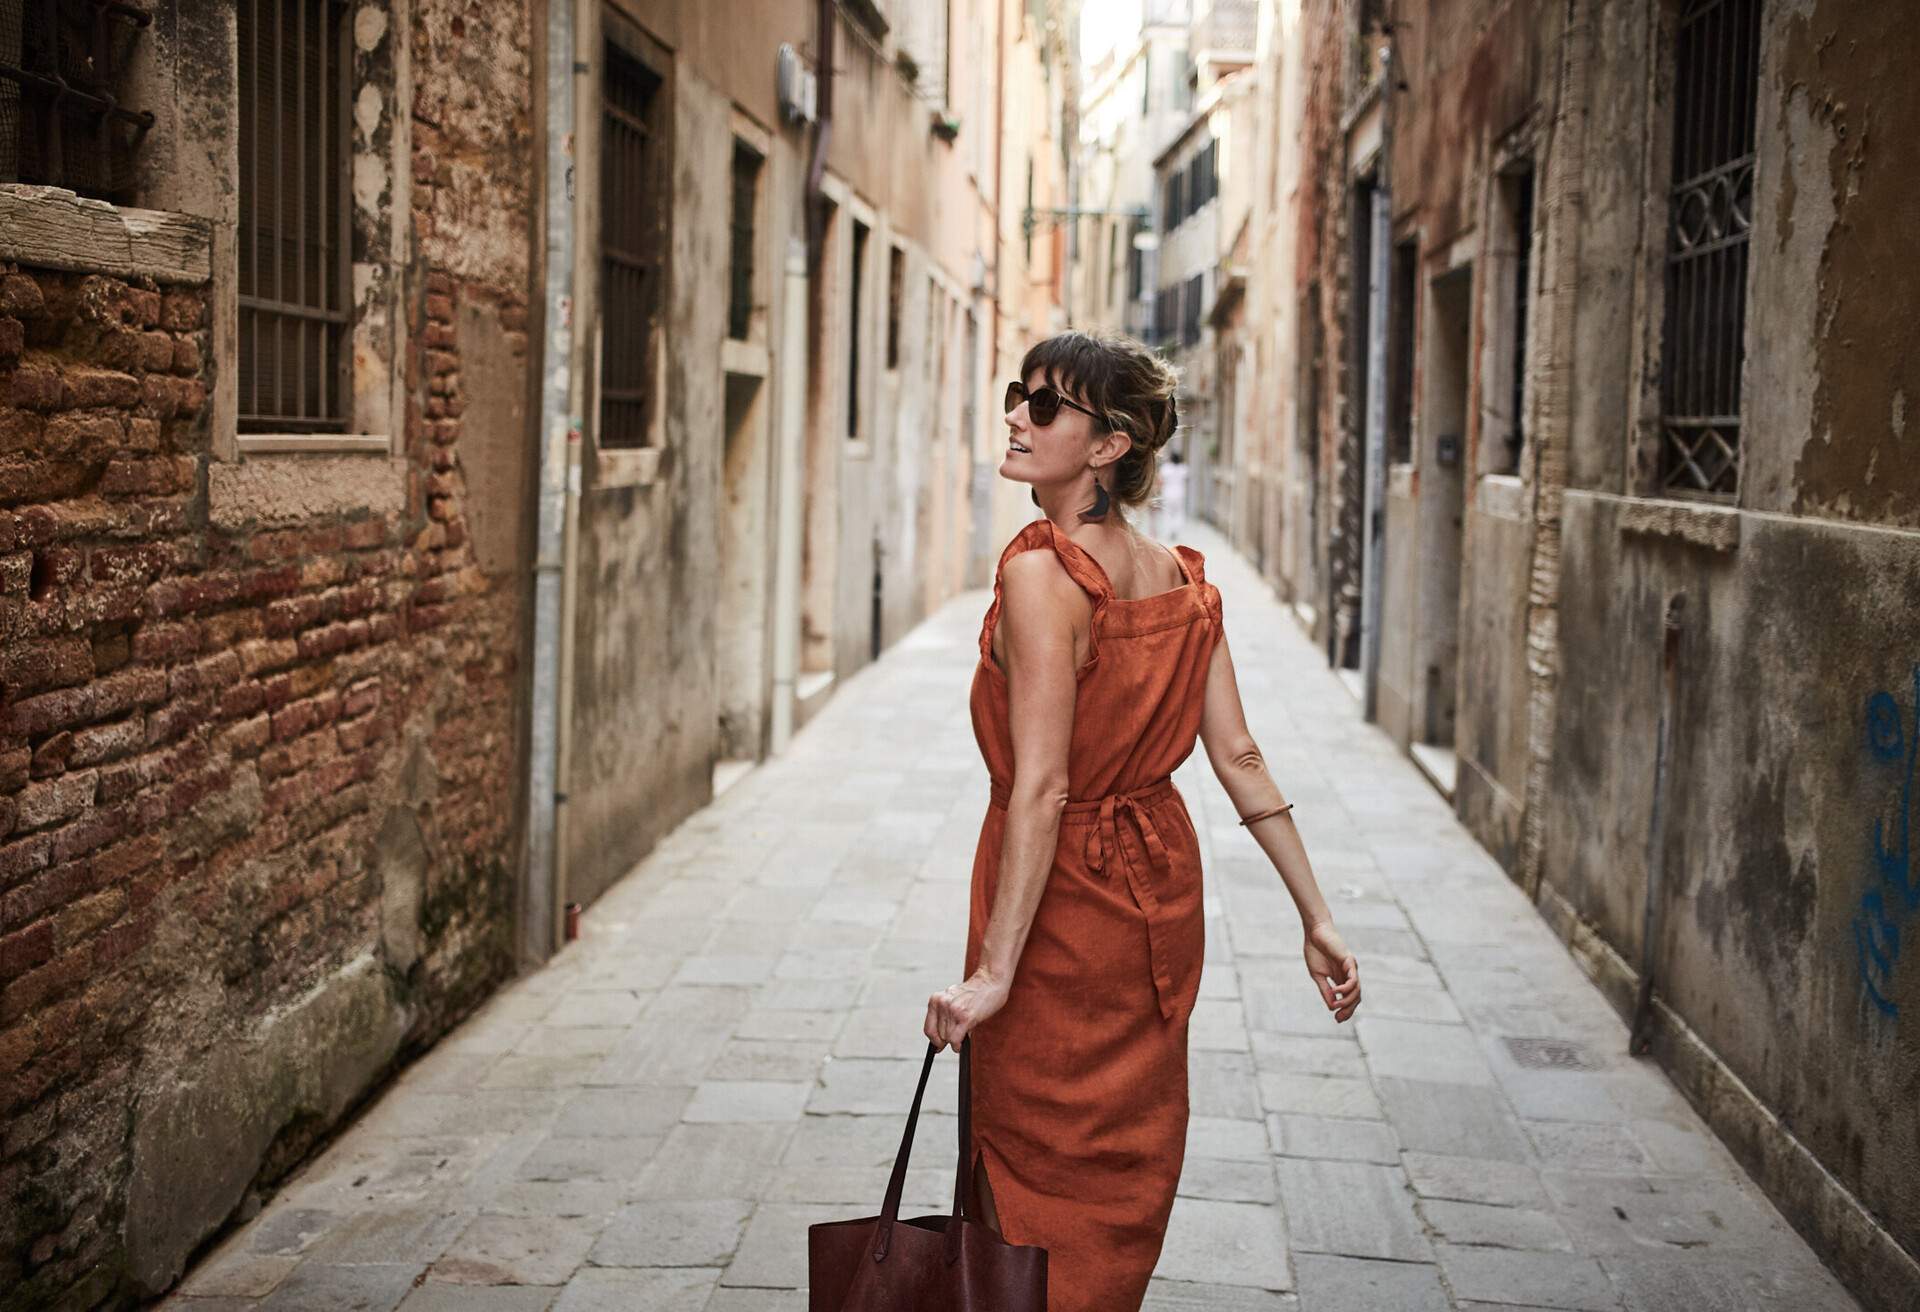 A young woman walks down an old street in Italy